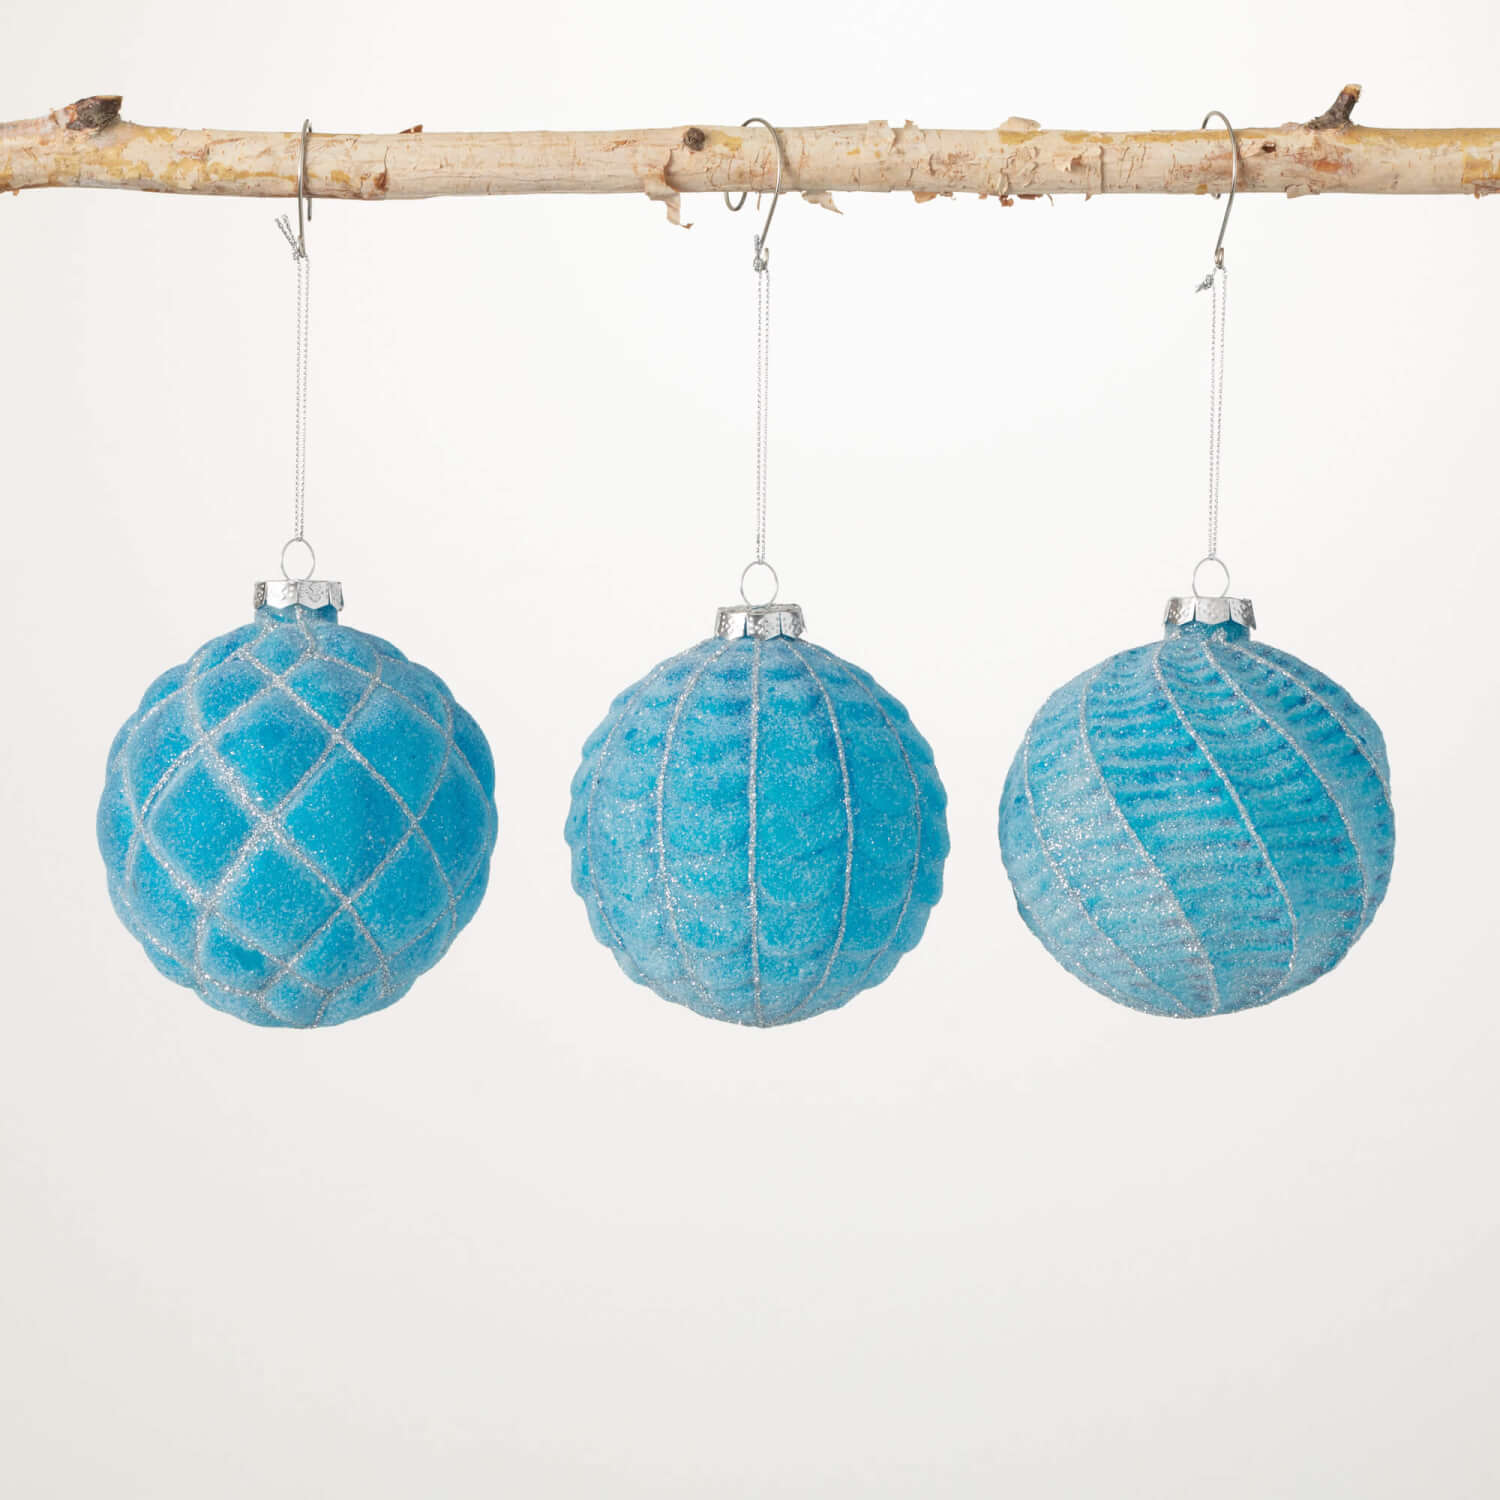 EMBOSSED ICY-BLUE ORNAMENT SET